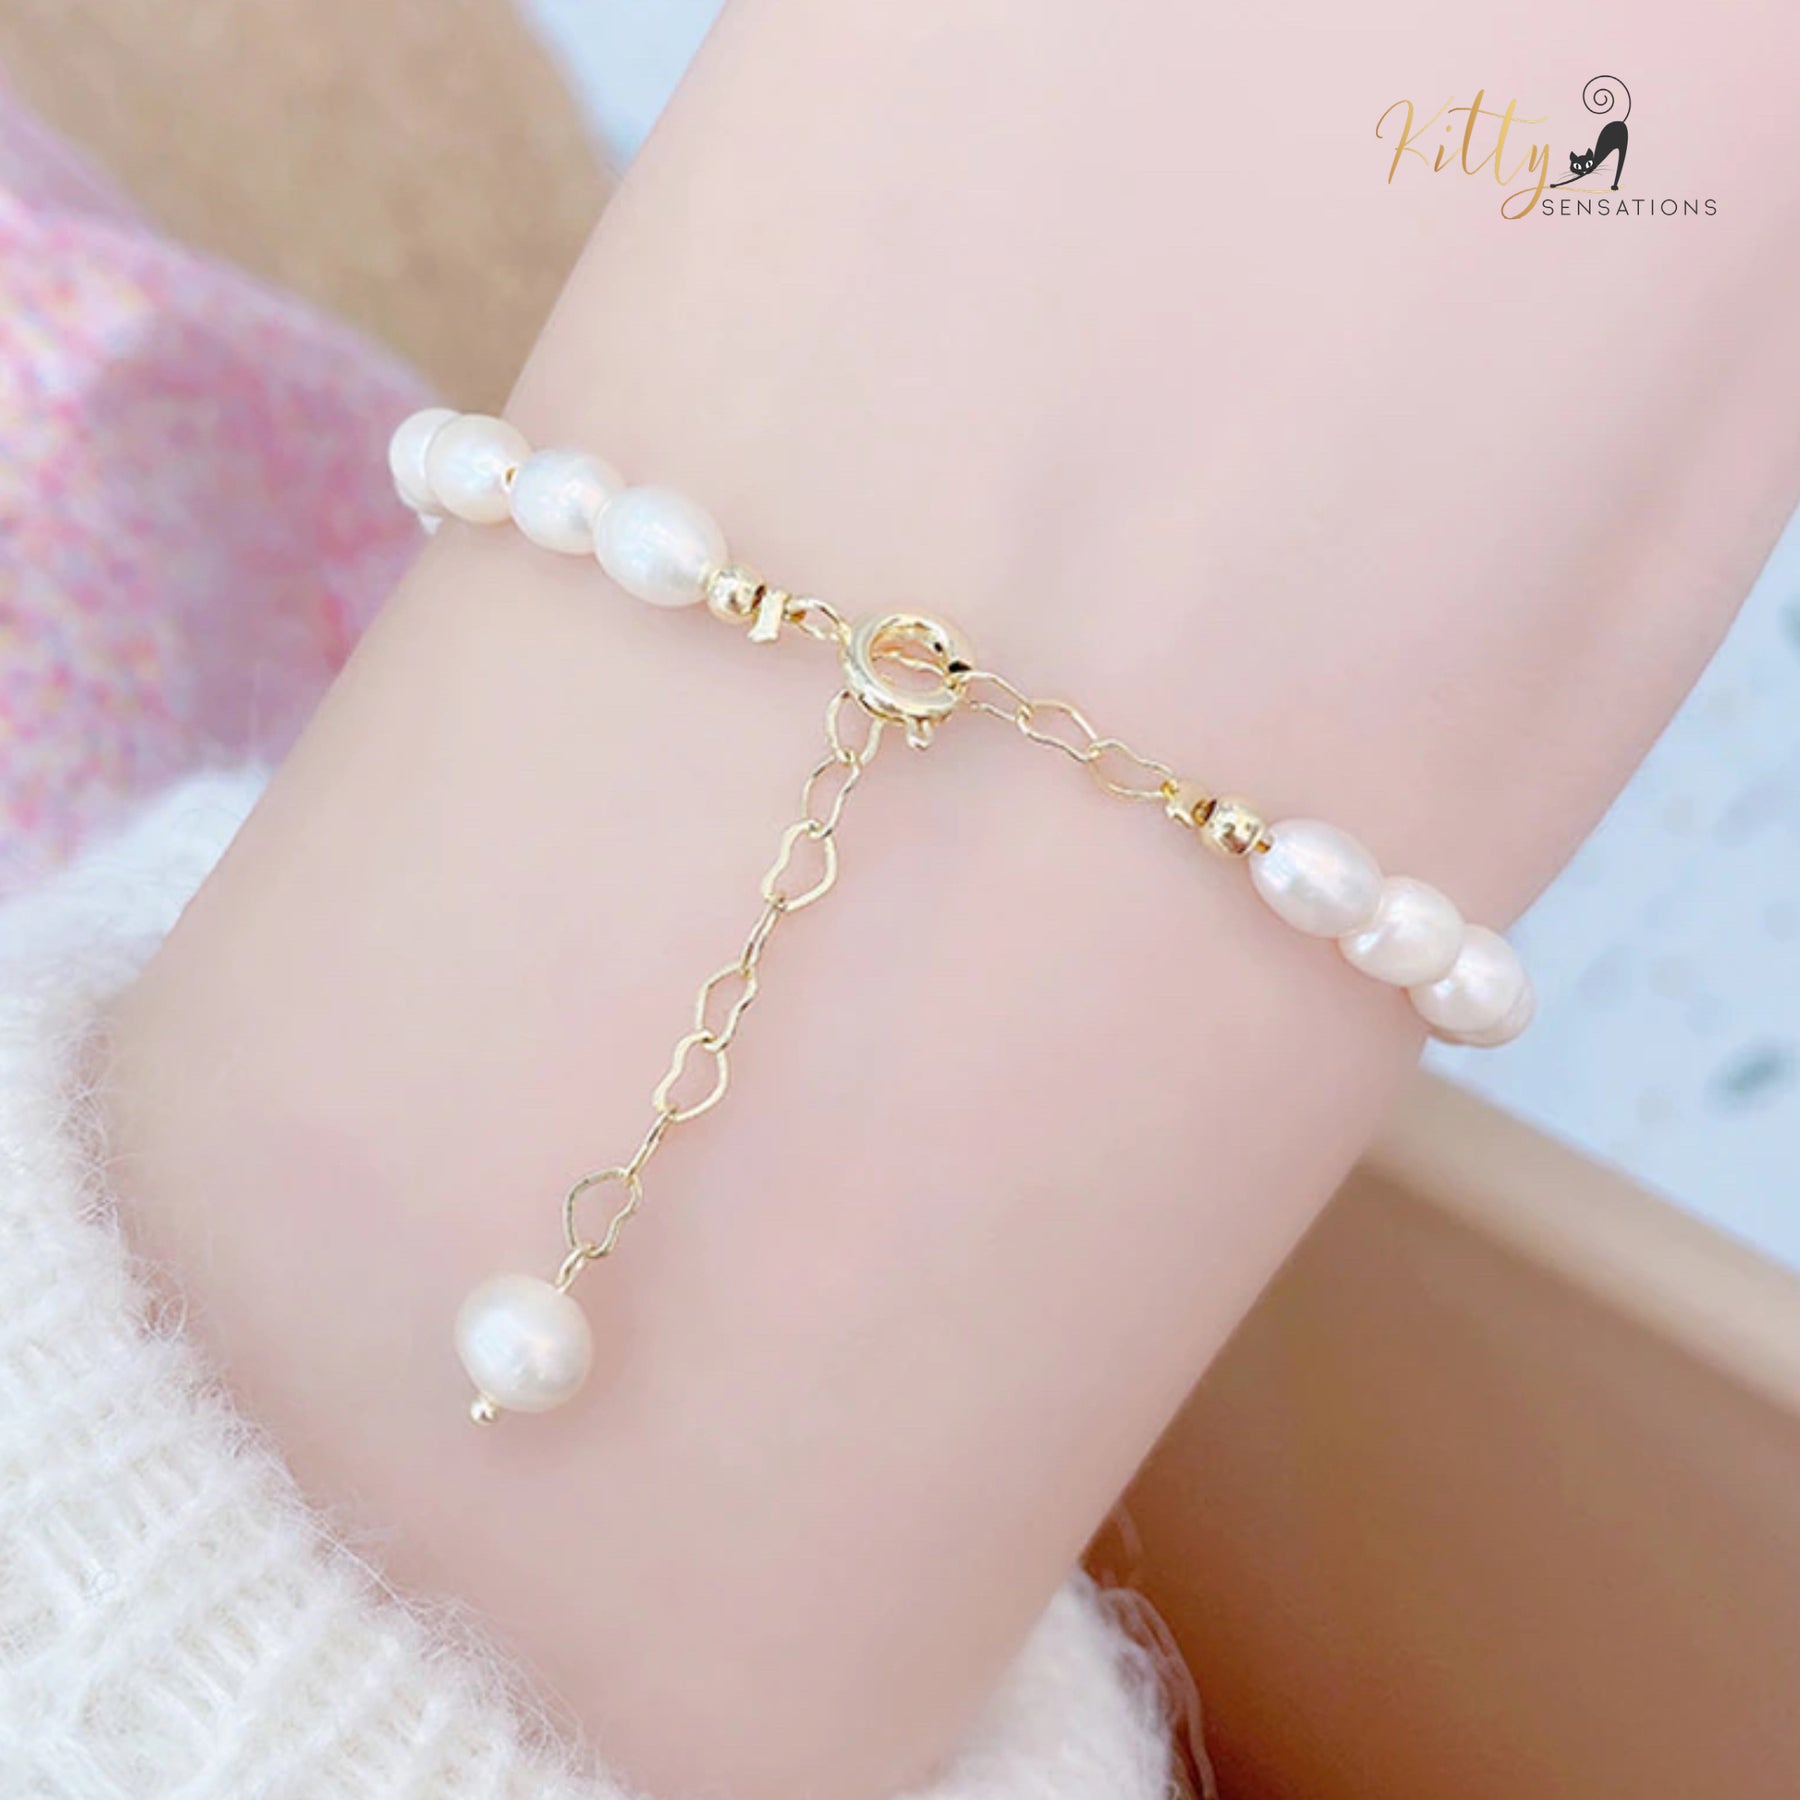 www.KittySensations.com Pearly Beads Cat Bracelet - Adjustable ($26.82): https://www.kittysensations.com/products/pearly-beads-cat-bracelet-adjustable